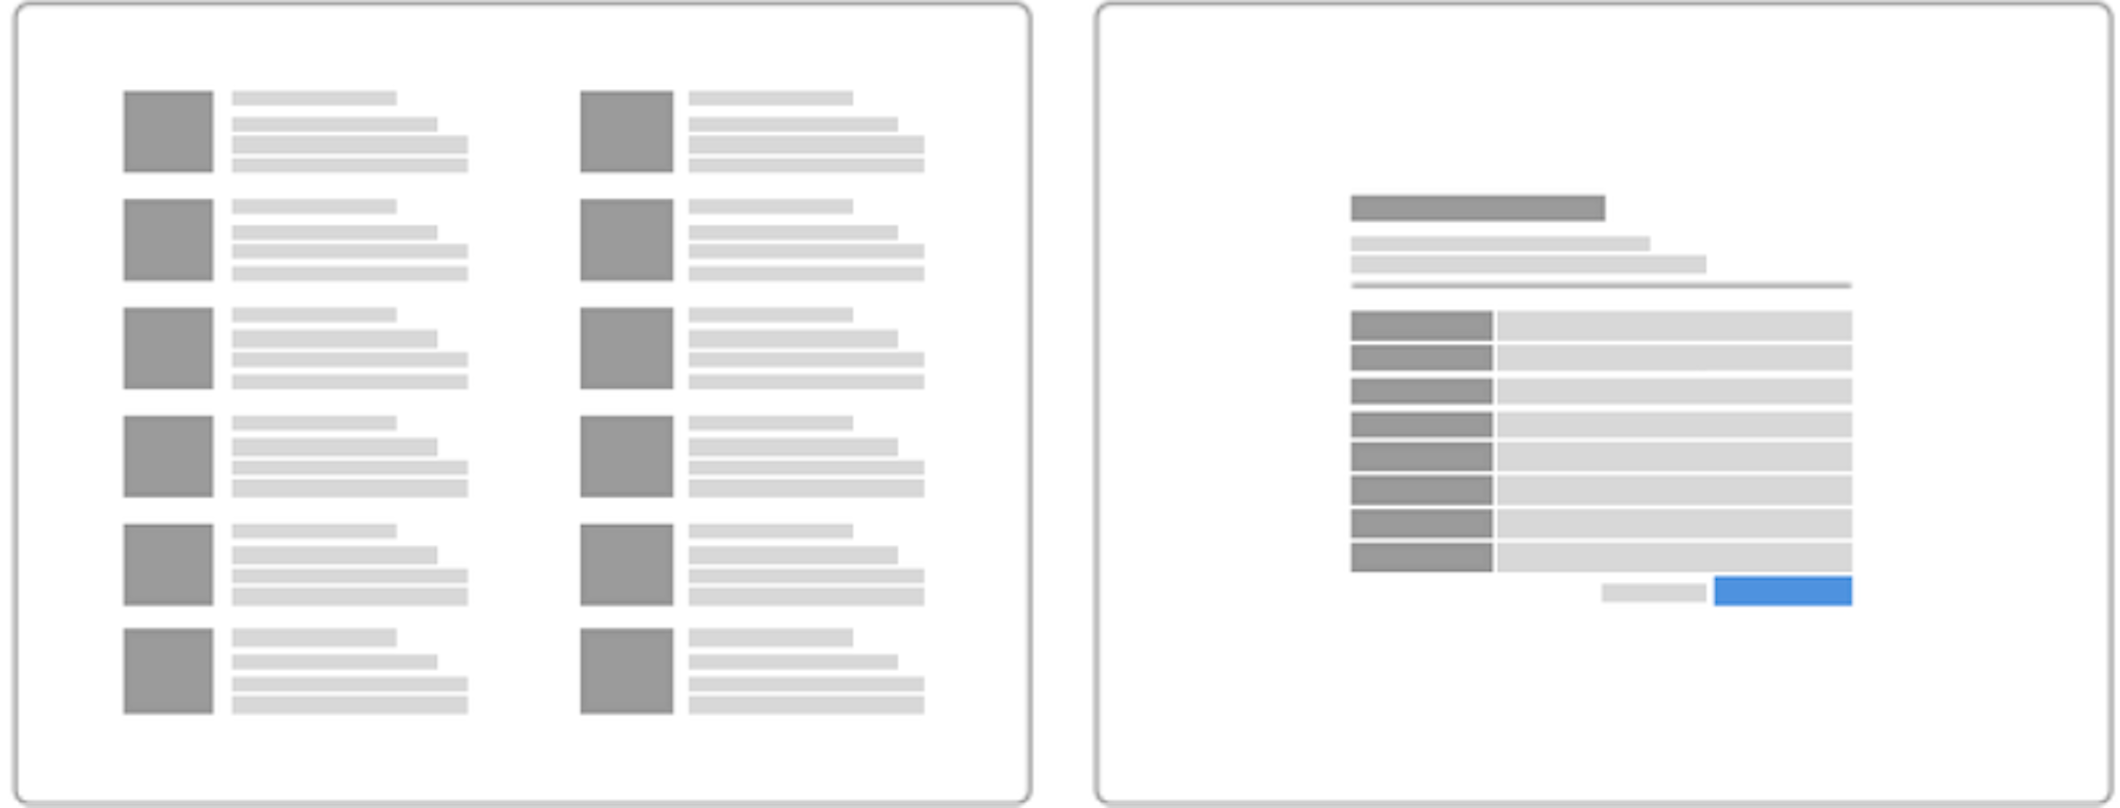 Two layout diagrams showing a two column list of cards  and a centered form.